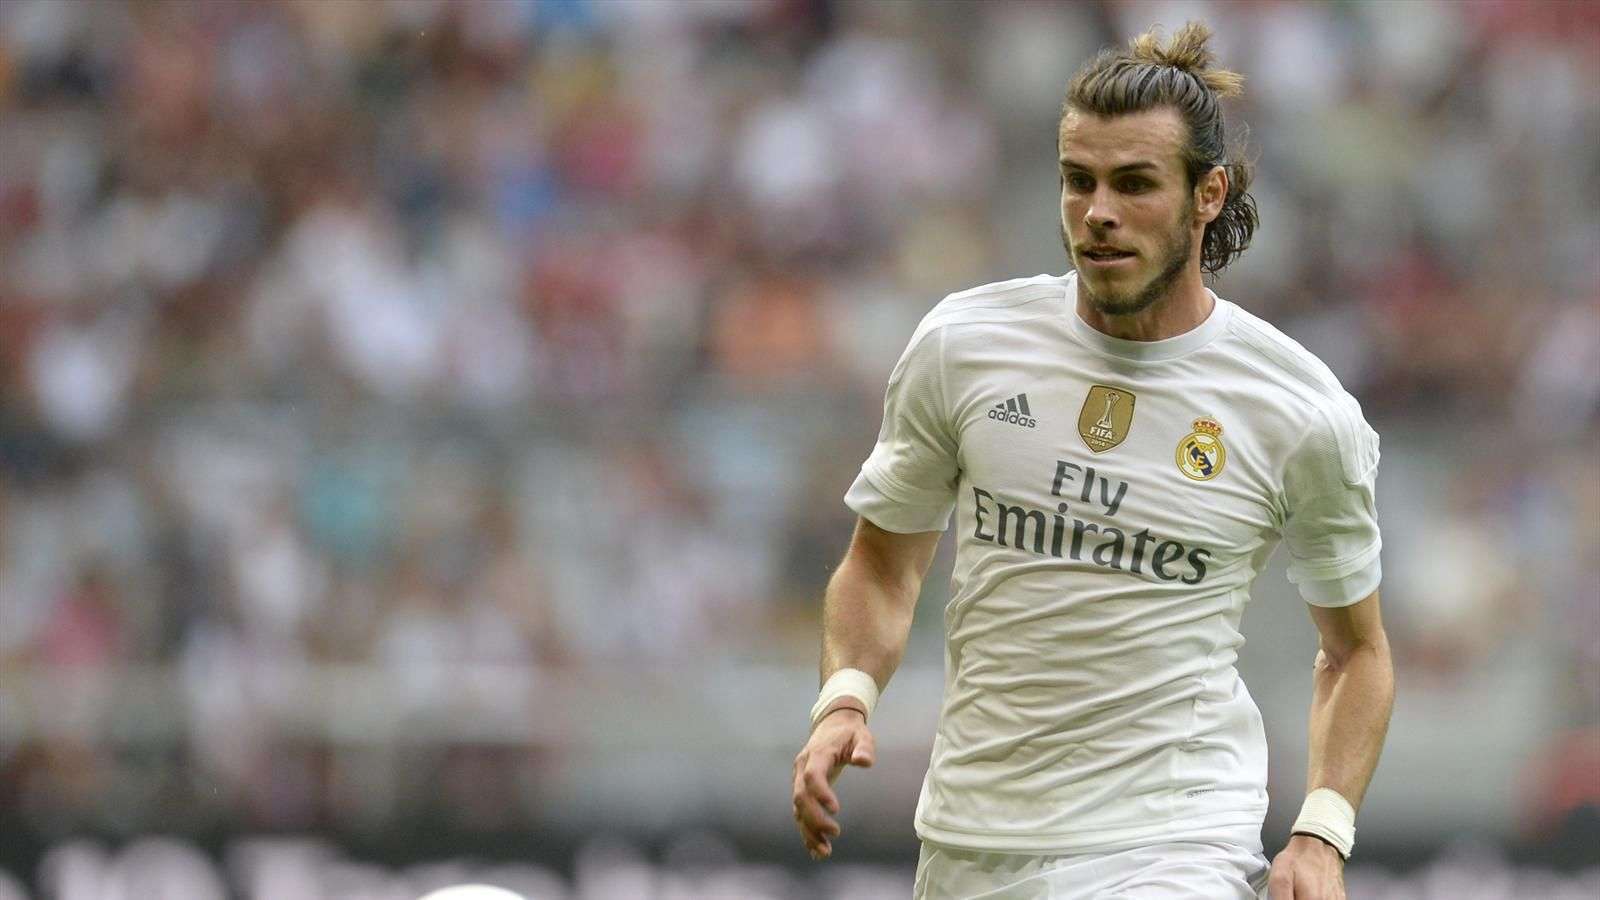 Manchester United want to sign Gareth Bale from Real Madrid in 2017